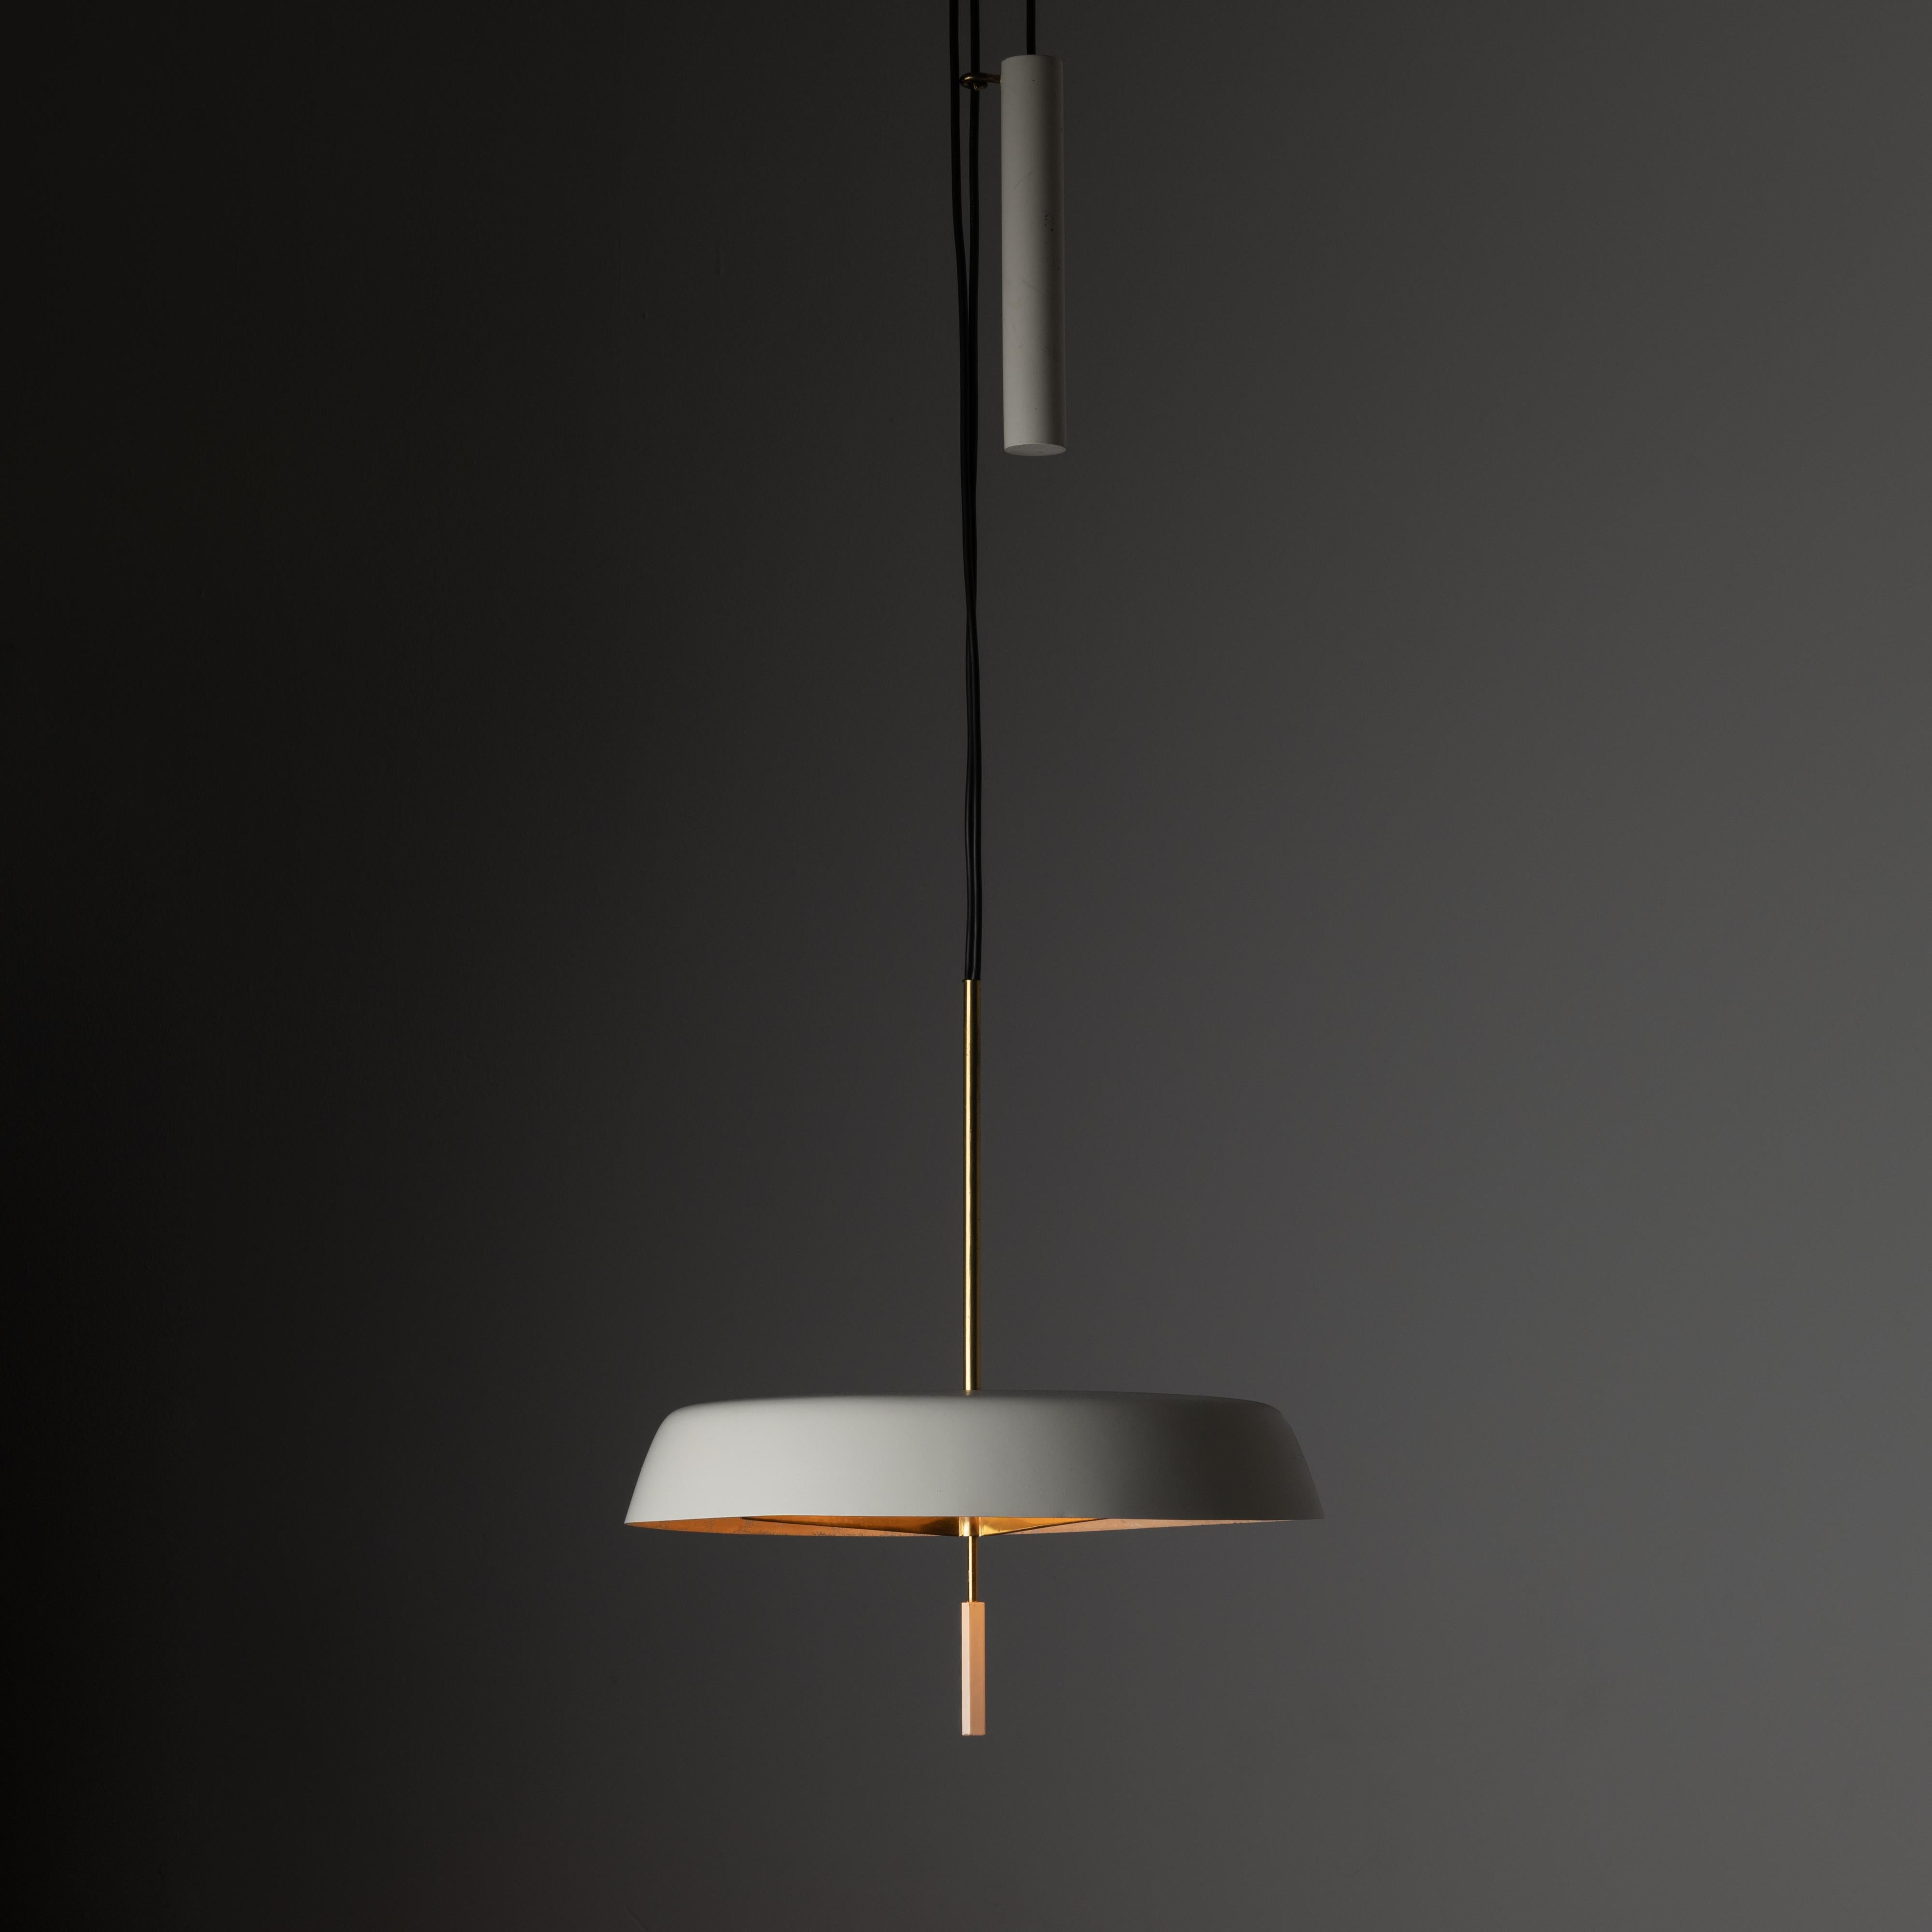 Suspension Light by Stilnovo. Designed and manufactured in Italy, circa the 1950s. A pulley system suspension ceiling light allows for height adjustment. The shade and bottom finial are an off-white, bone colored enameled finish. The bottom diffuser